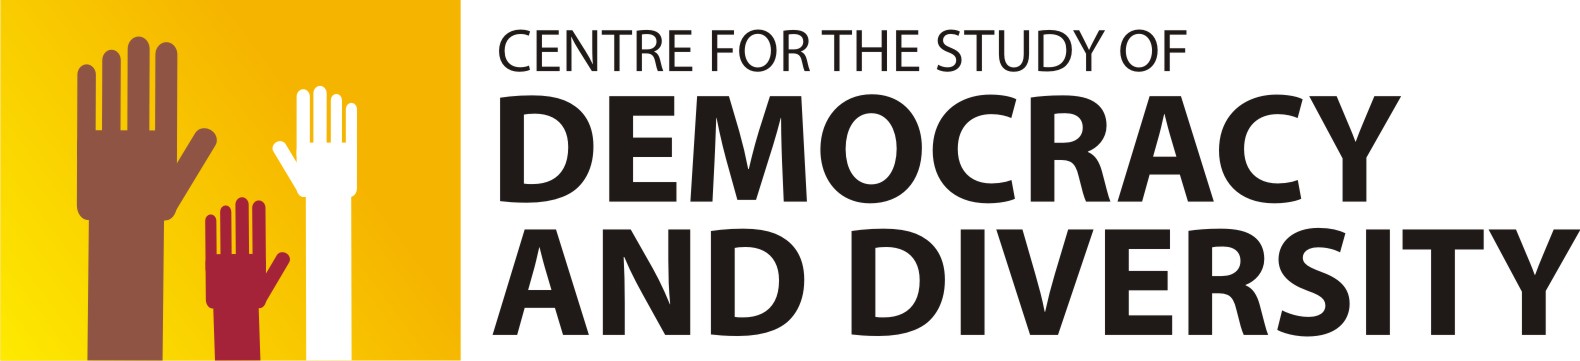 Centre for the Study of Democracy and Diversity